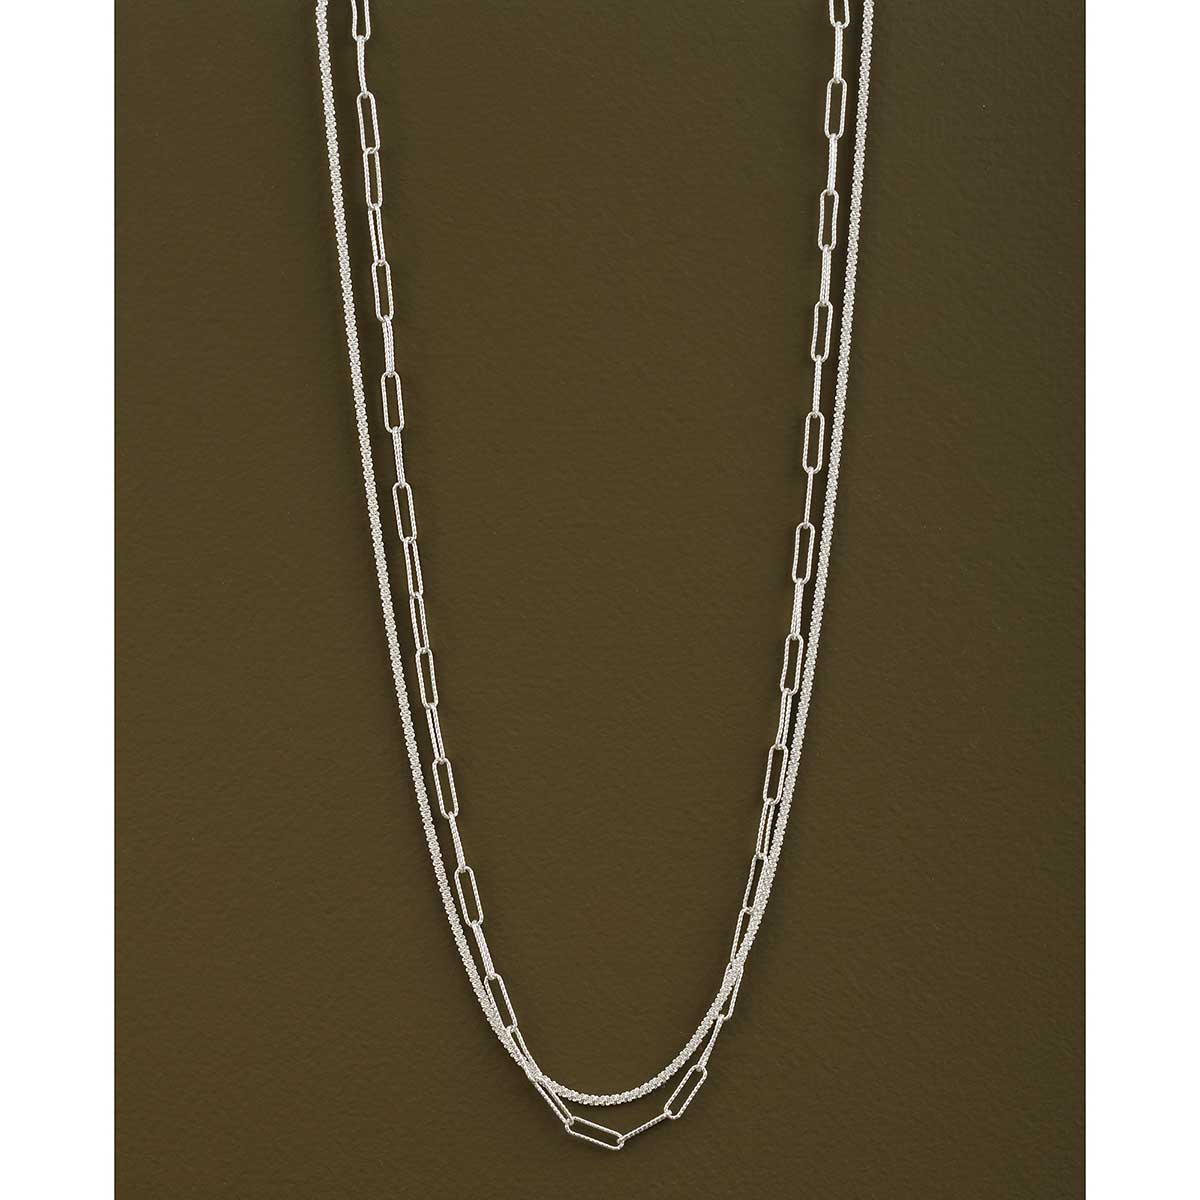 NECKLACE 2 LAYER MATTE SILVER